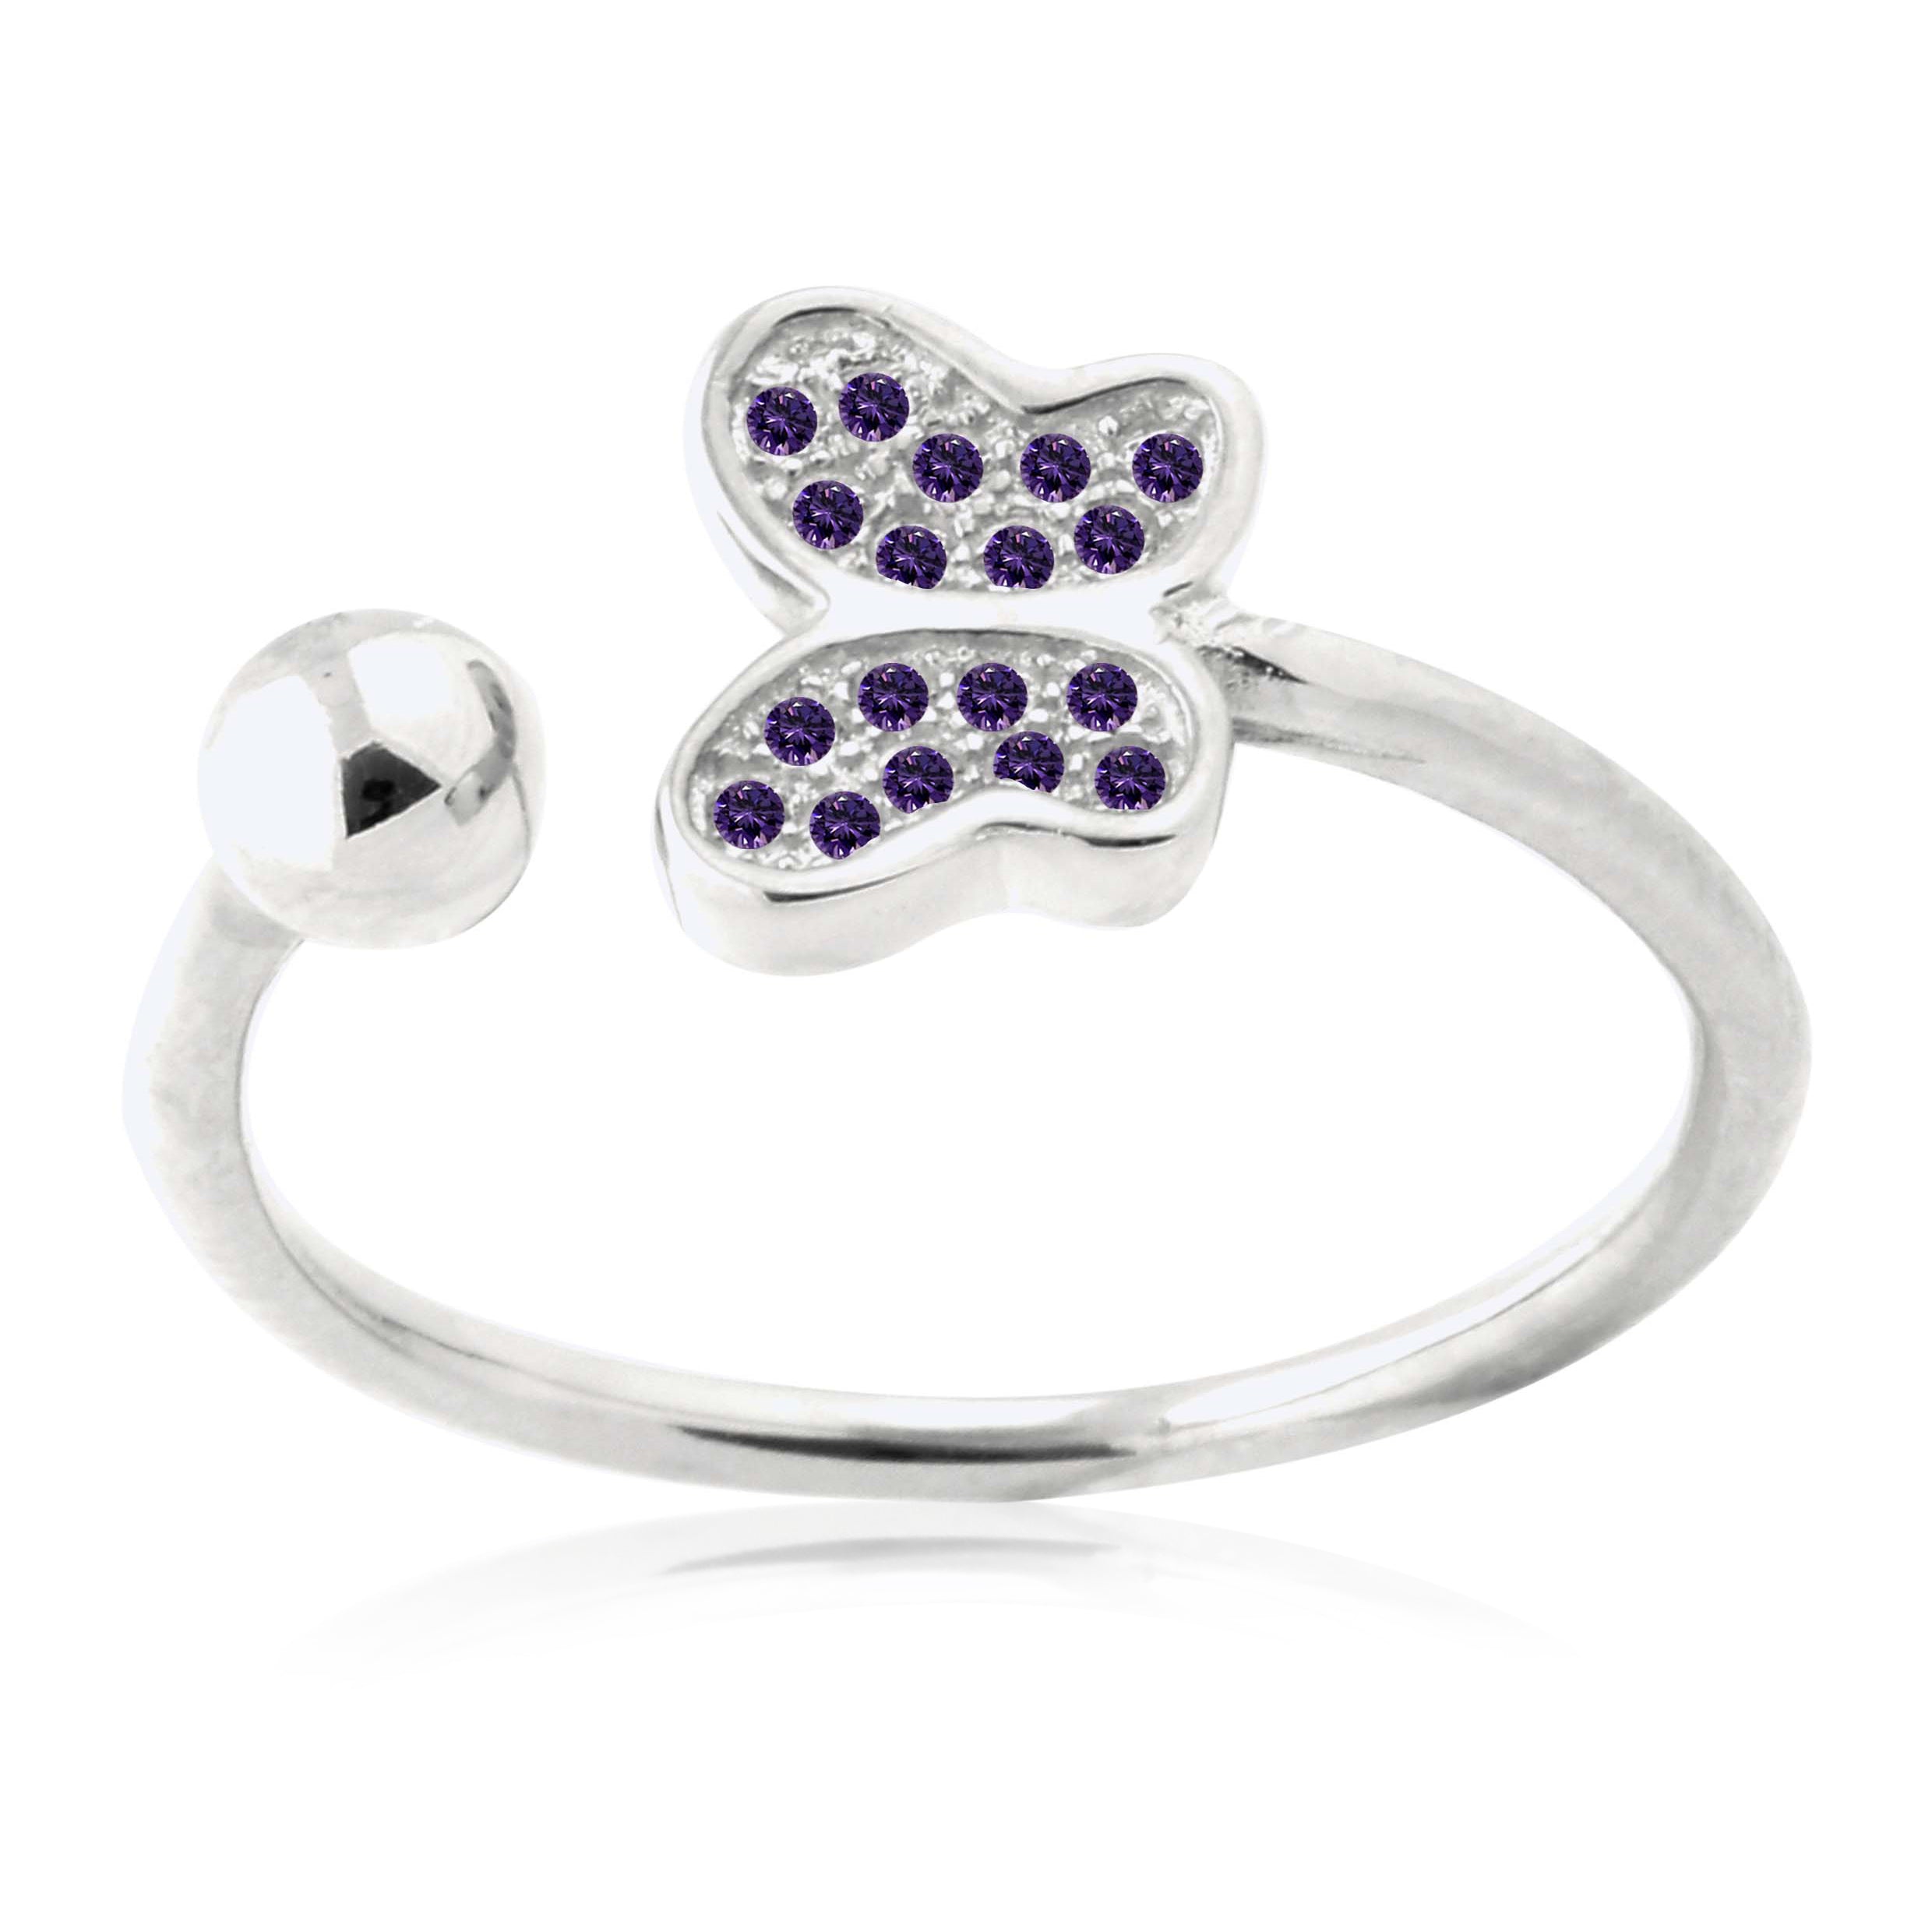 Adjustable Butterfly Ring in Sterling Silver Pavé with CZ Pink or Purple